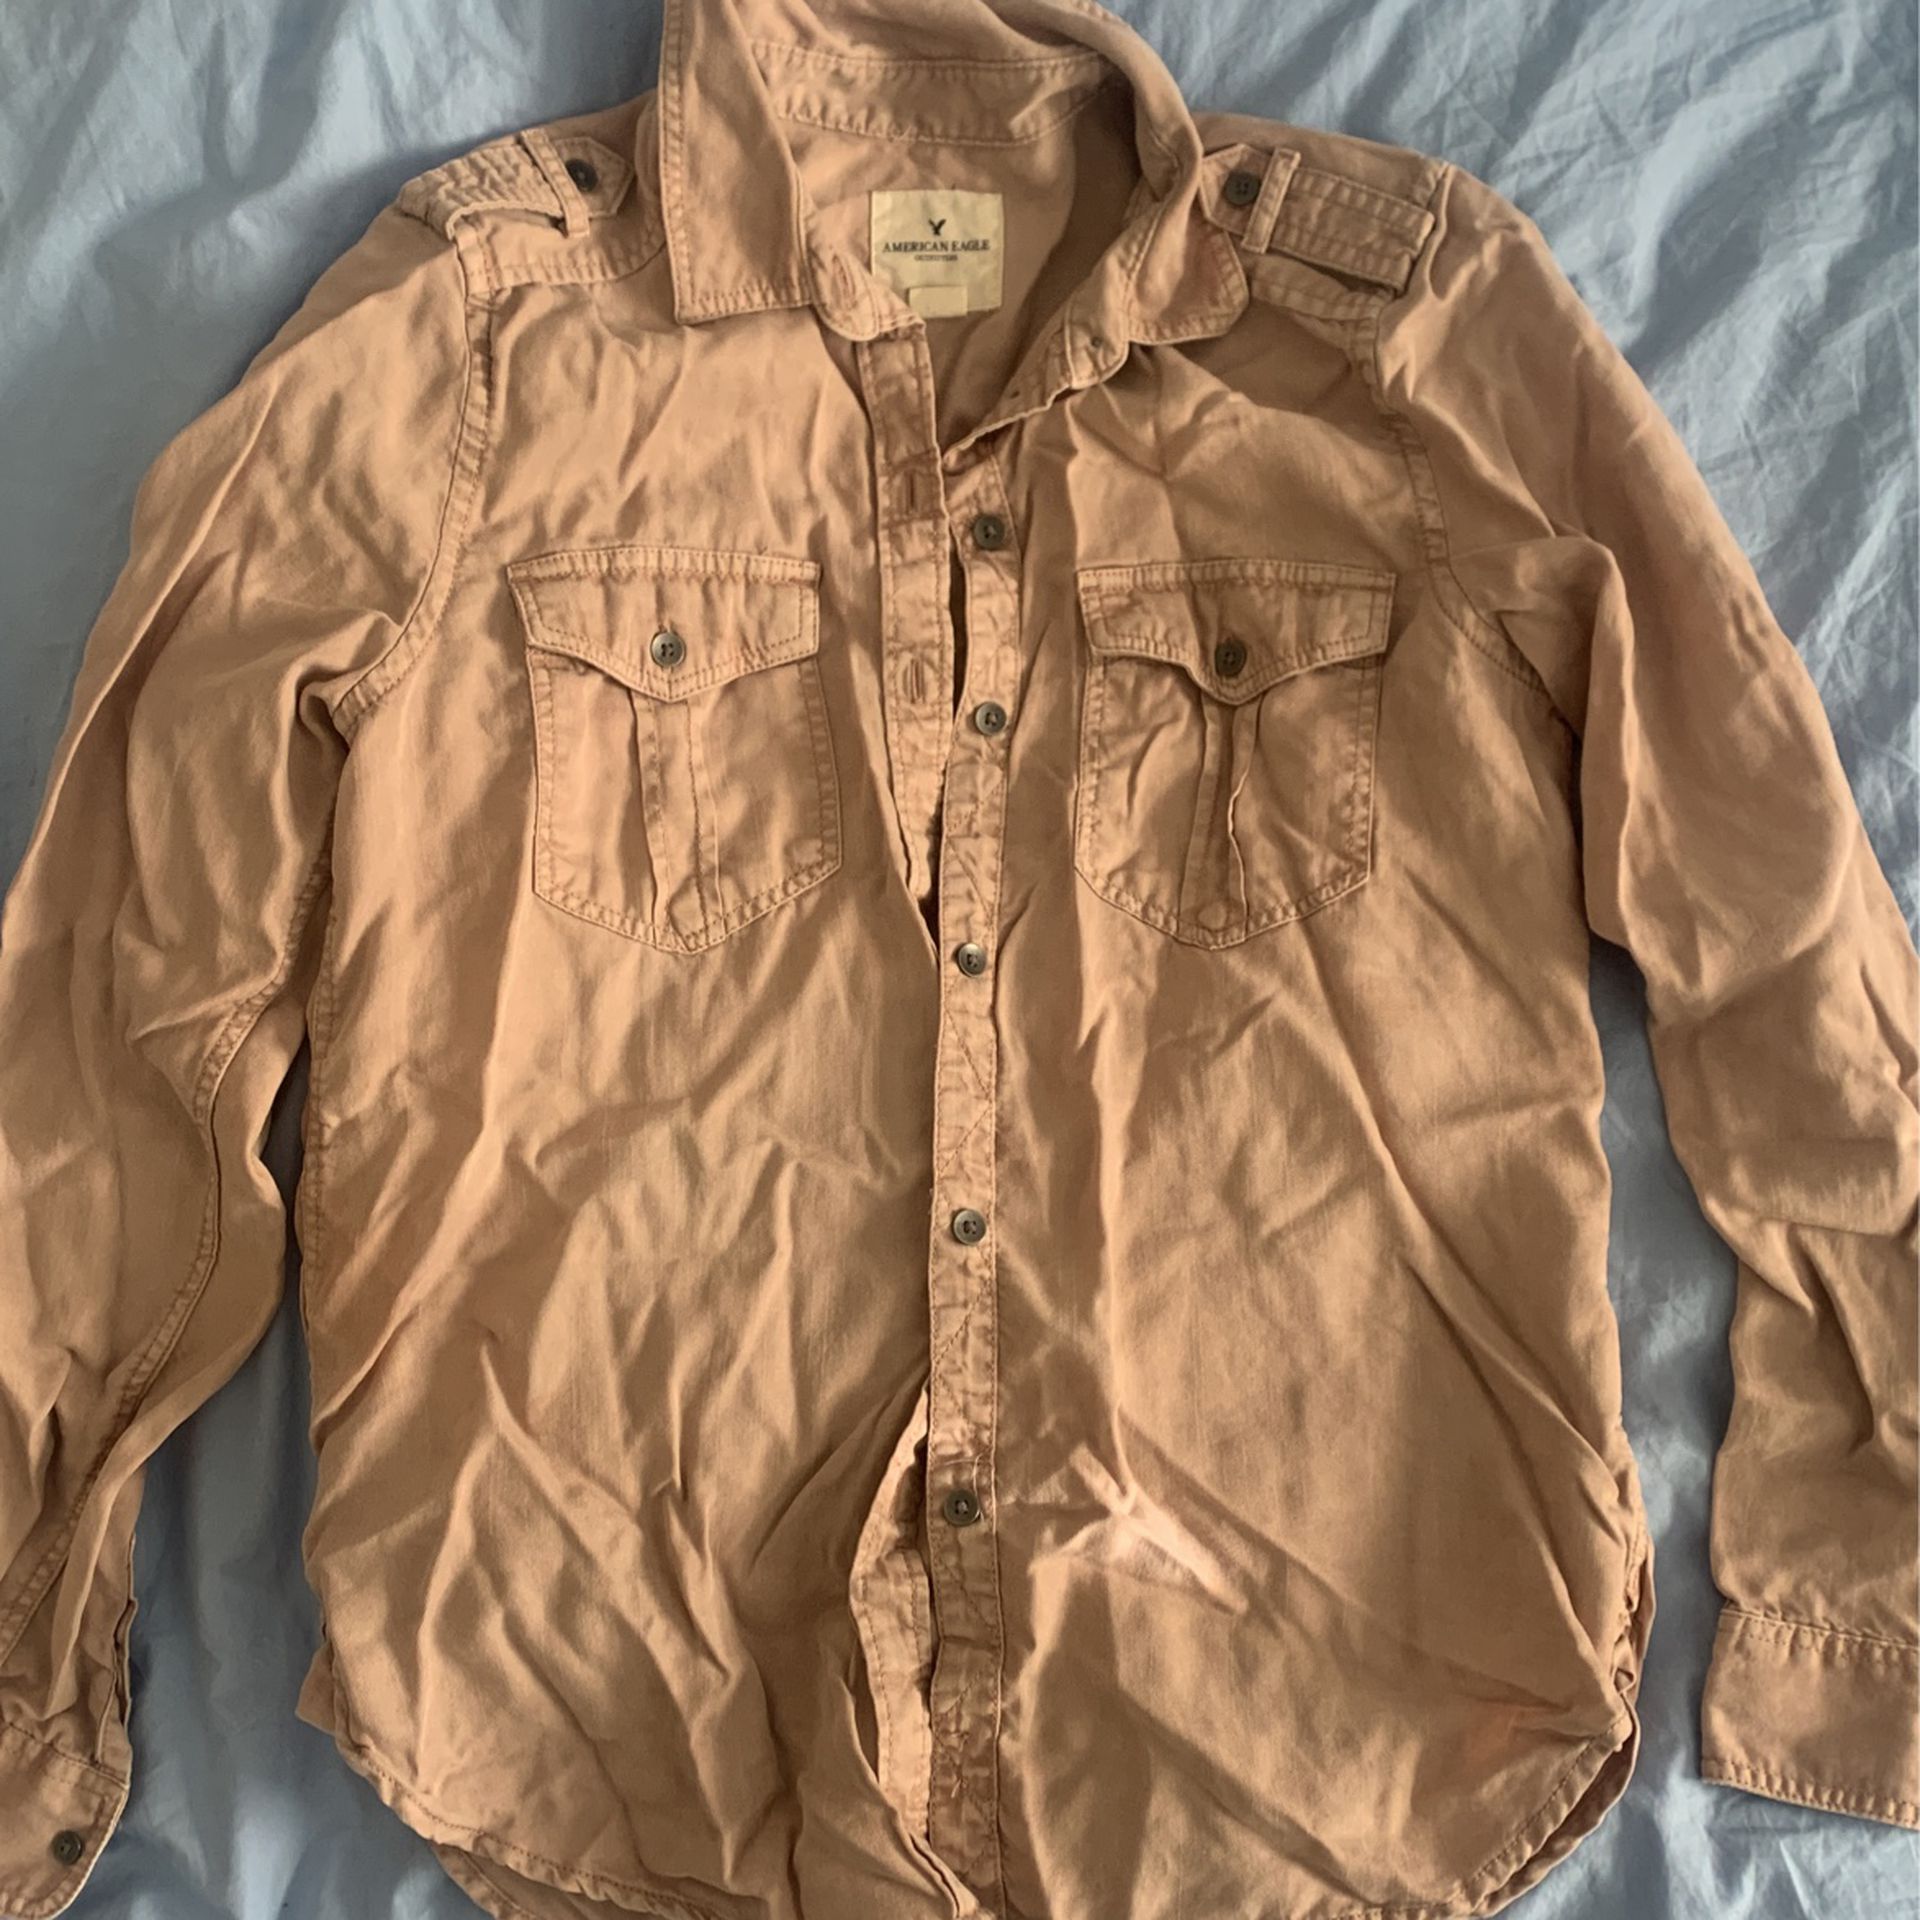 Pink button-up American Eagle long sleeve